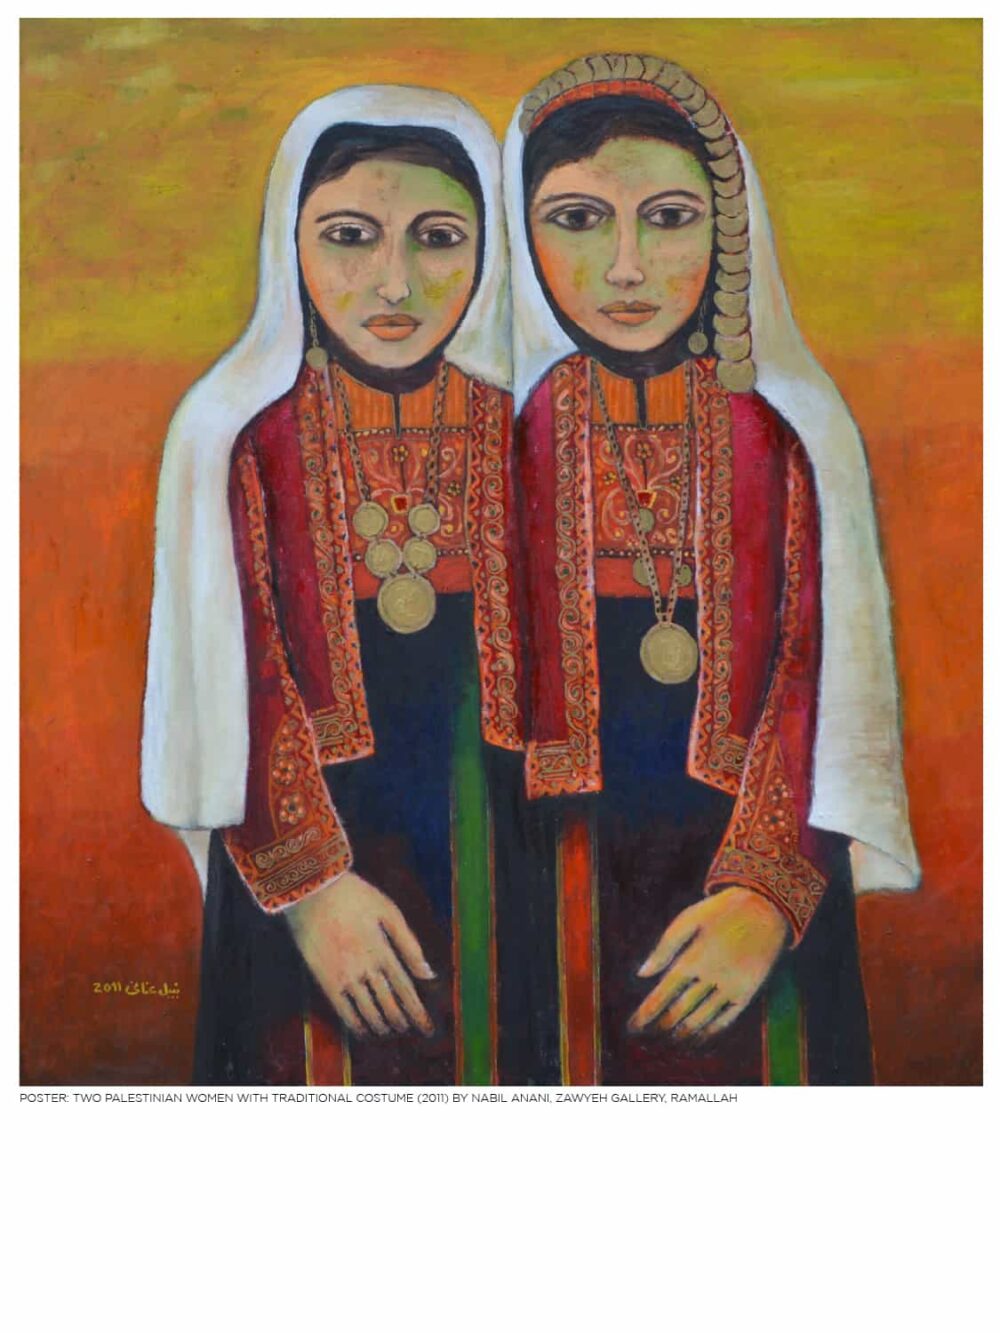 Two Palestinian Women With Traditional Costume by Nabil Anani